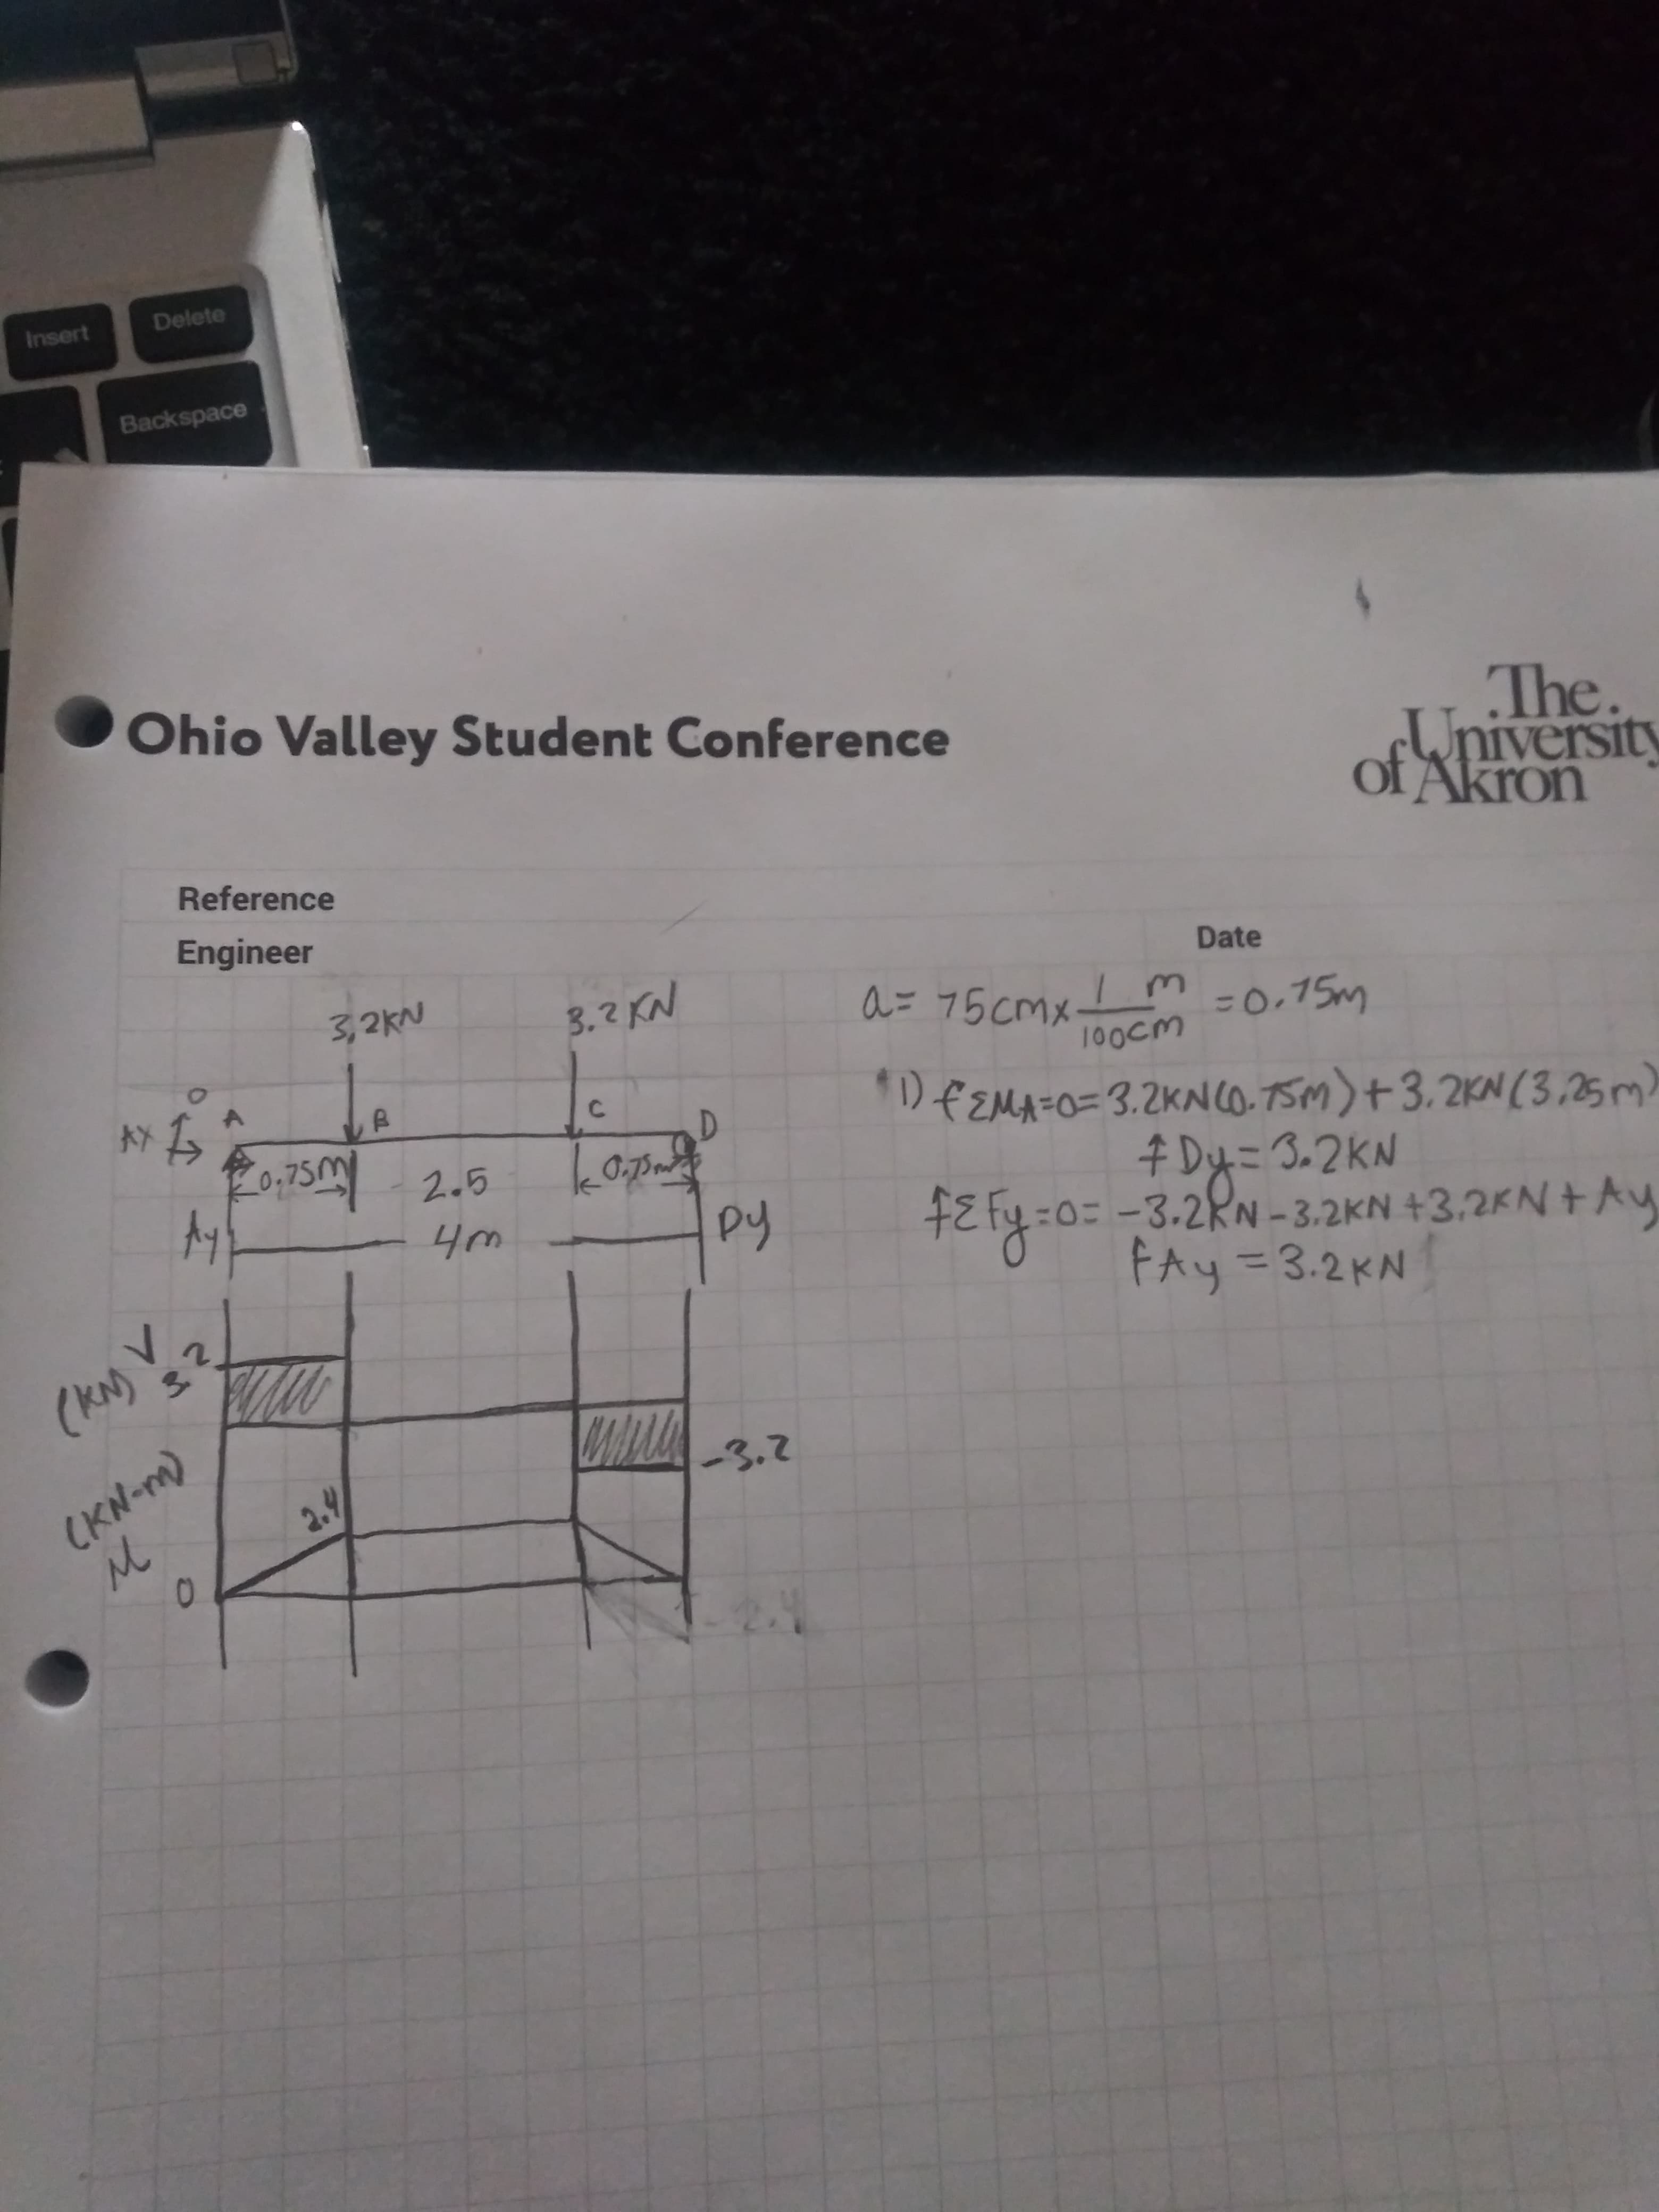 Delete
Insert
Backspace
Ohio Valley Student Conference
The.
University
Akron
Reference
Engineer
3,2KN
3.2 KN
Date
a= 75 cmx_!
M30.75m
100cM
D€EMA=0=3.2KNCO.75M)+3.2KN (3,25 m)
F0.75M 2.5
D.
# Dy=3.2KN
=0=-3.2RN-3.2KN +3,2KN+Ay
Чт
py
+E fy
(KN)?
3.
FAy=3.2KN
(KN-m)
м
-3.2
2.4
